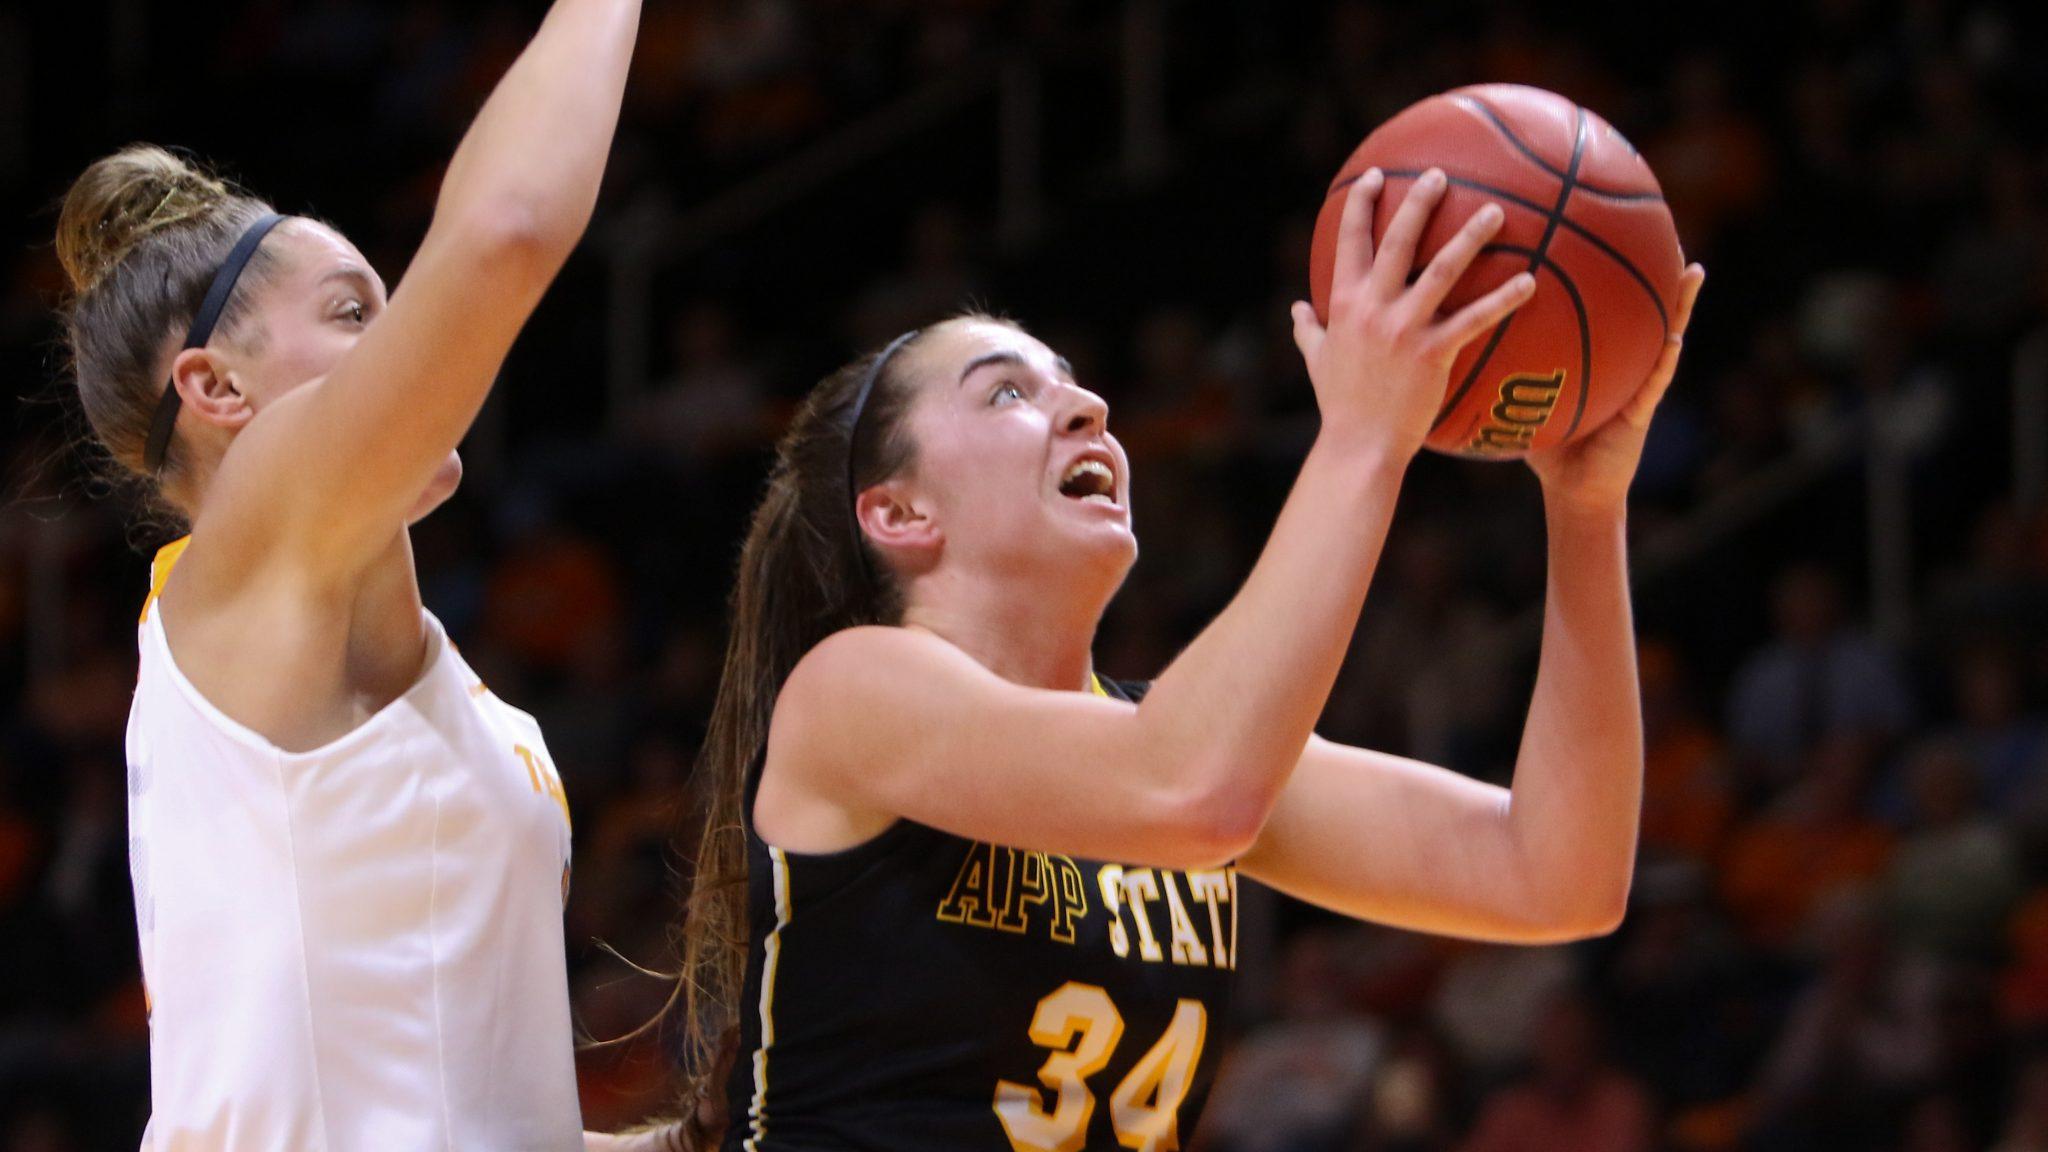 Appalachian State takes on Tennessee in non-conference womens basketball action at Thompson-Boling Arena on Wednesday, December 14, 2016 in Knoxville, Tennessee.
Photo Courtesy: App State Athletics/Randy Sartin